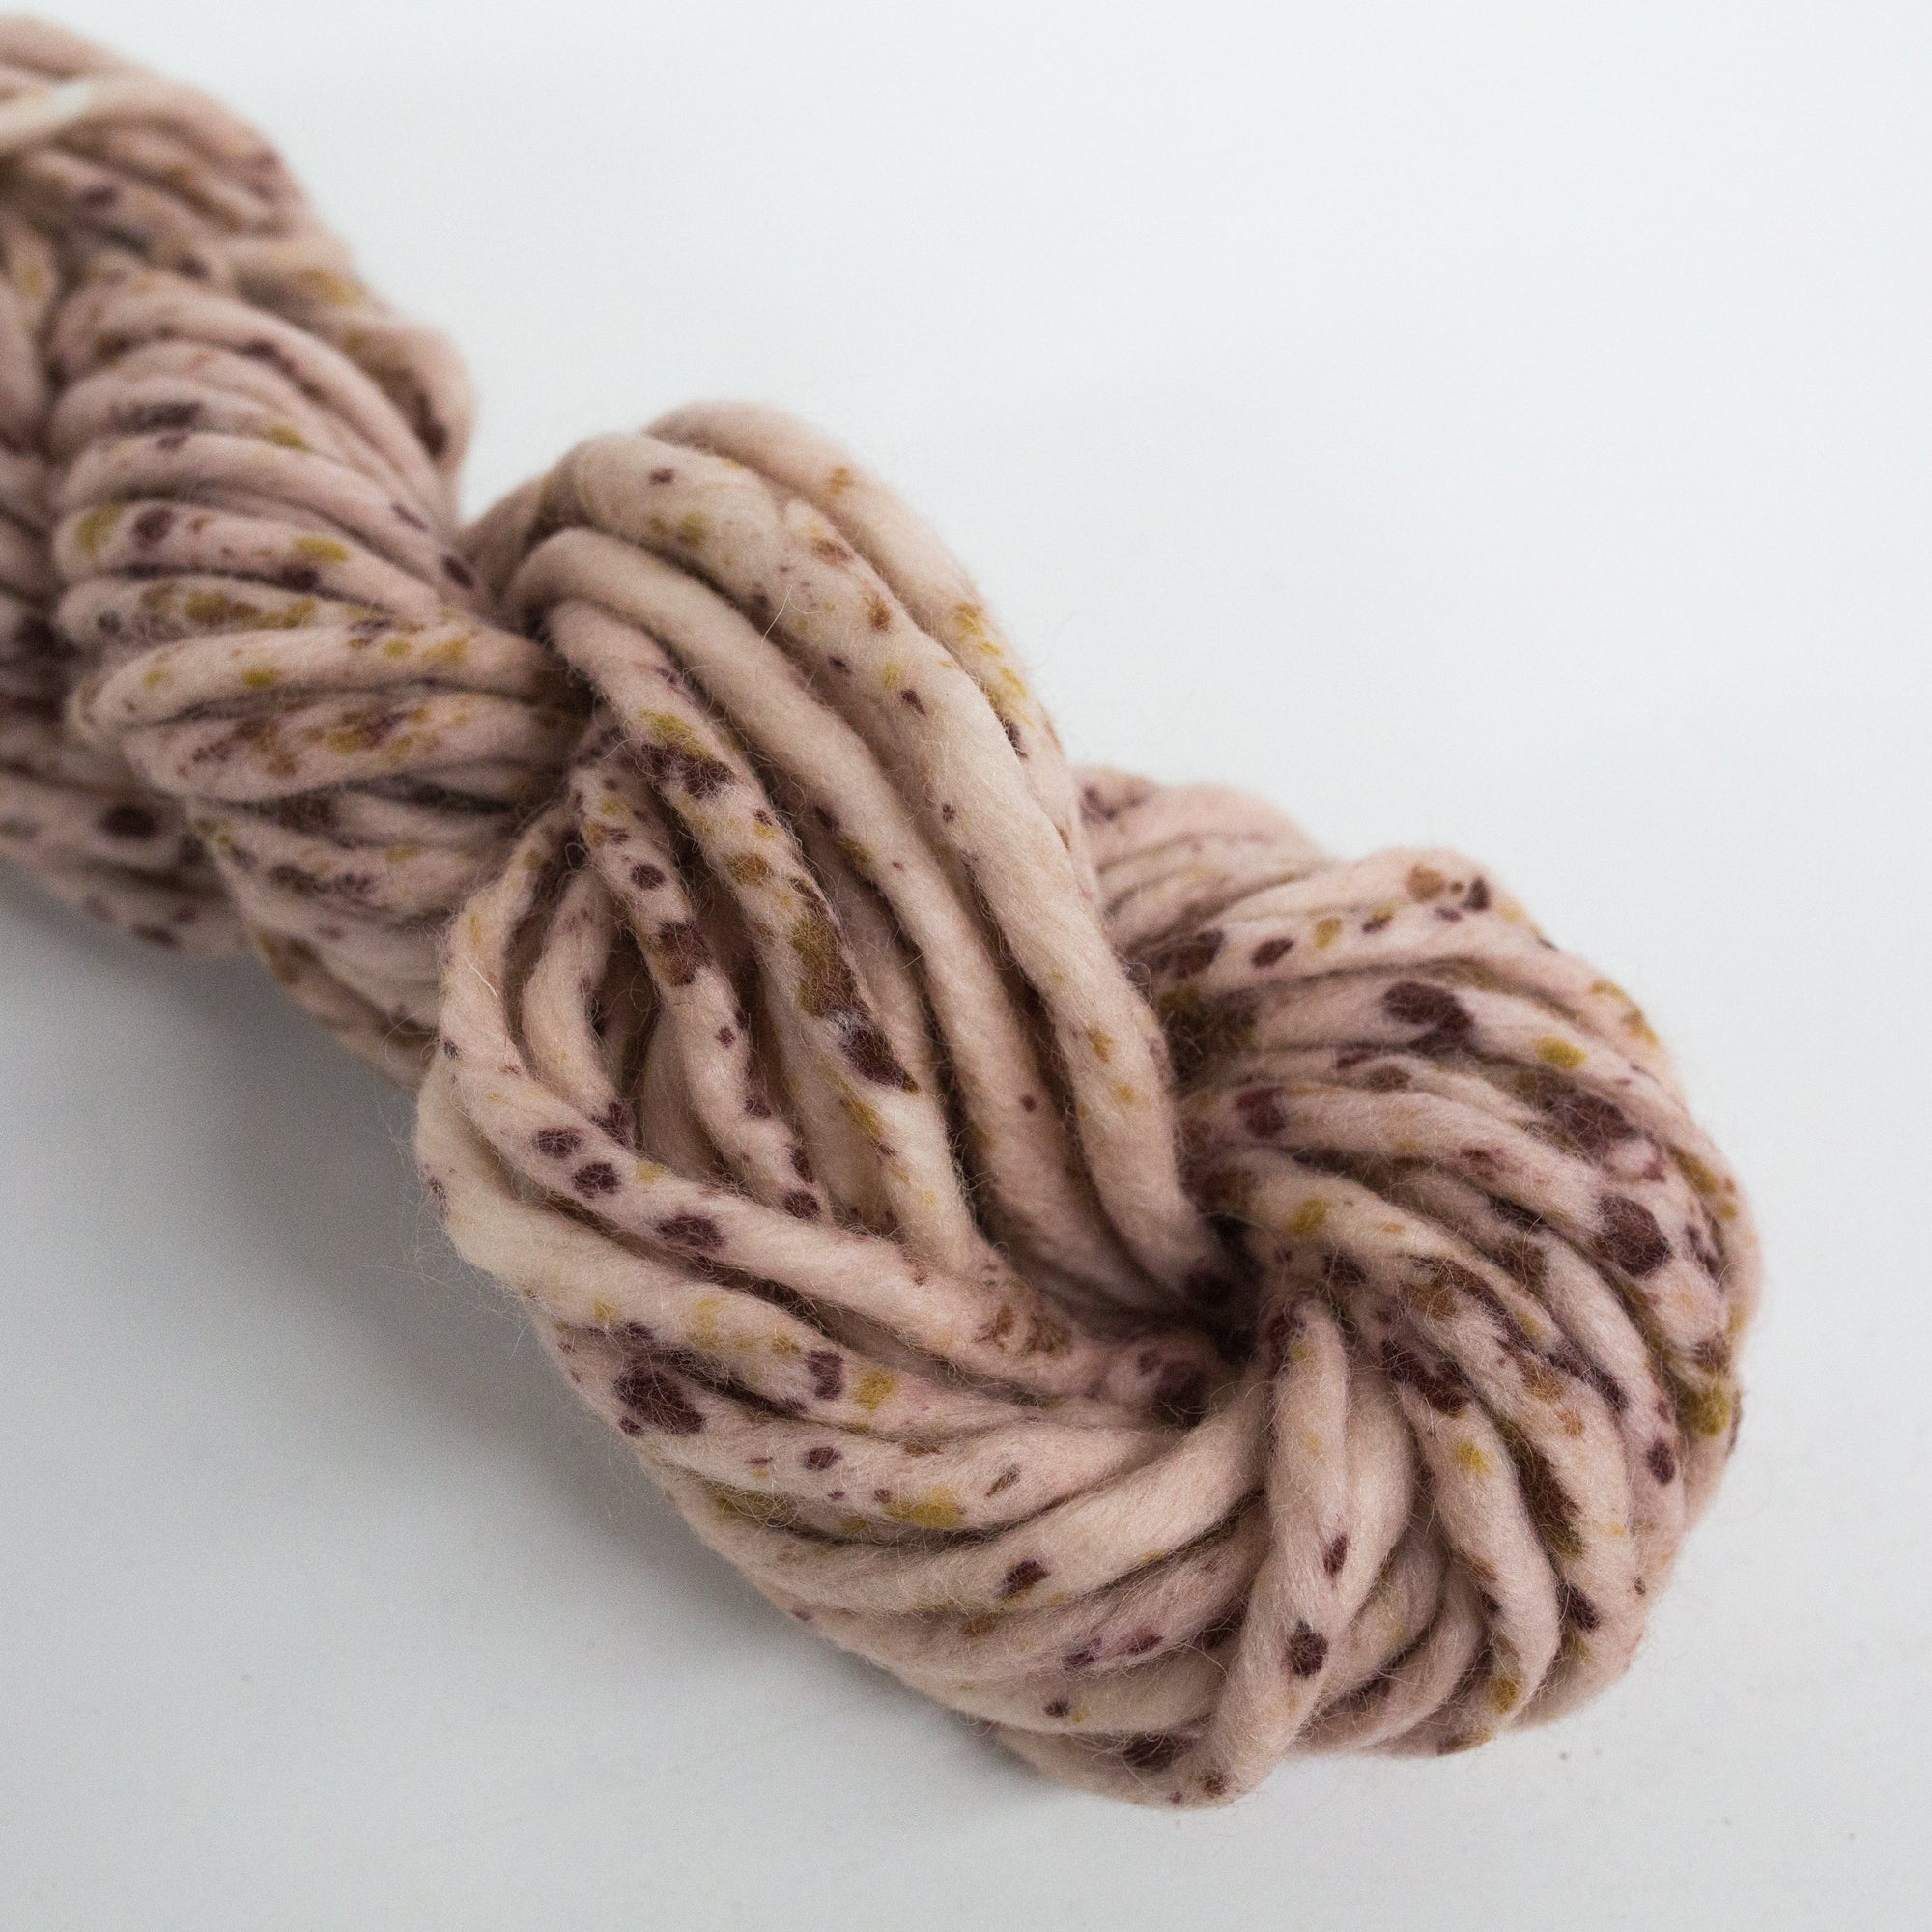 Mary Maker Studio speciality fibre Cookie Dough Confetti Felted Finger Rope macrame cotton macrame rope macrame workshop macrame patterns macrame